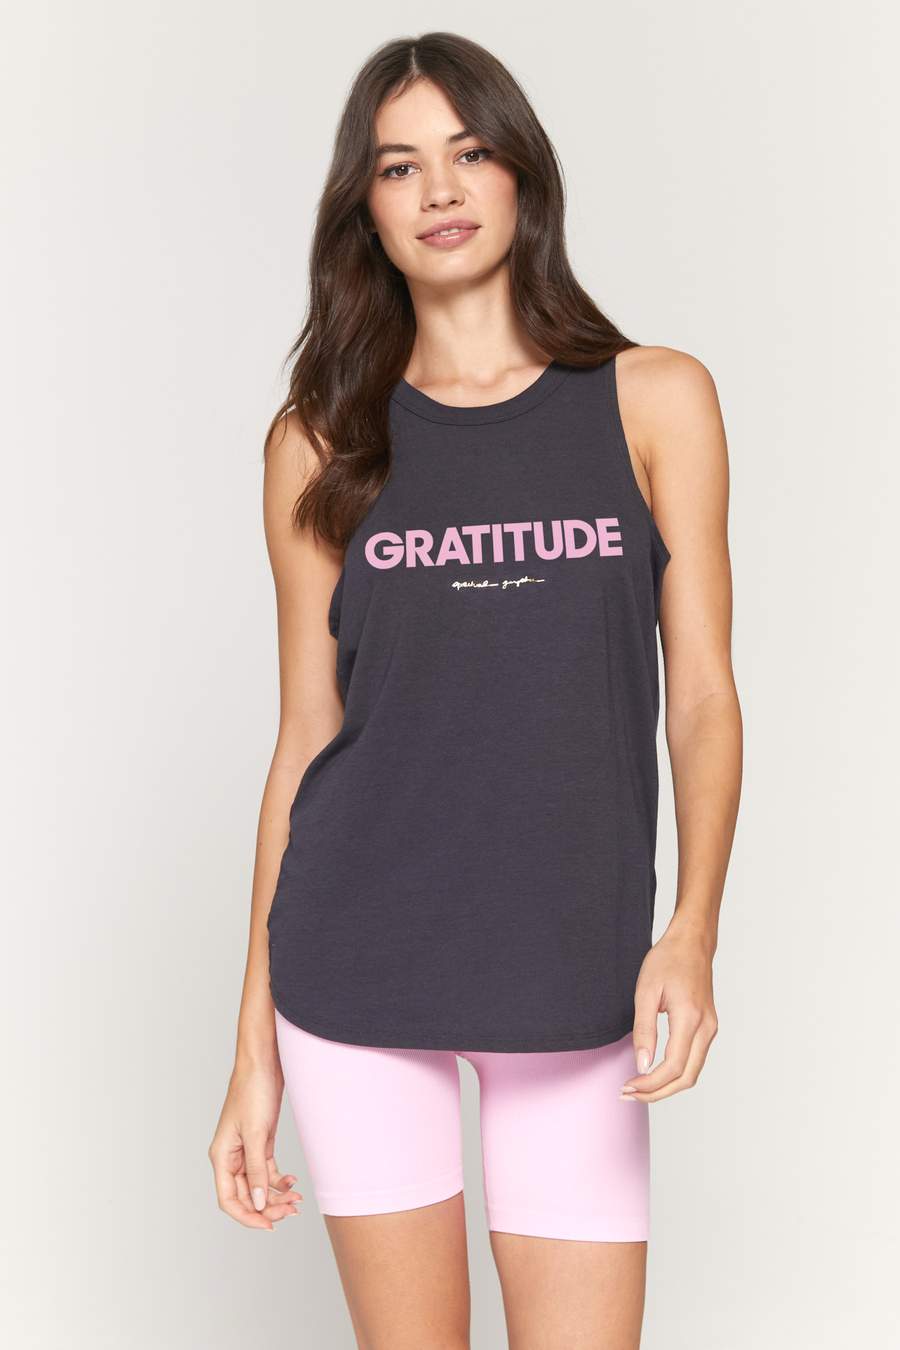 UNIKONCEPT Lifestyle Boutique and Lounge; Spiritual Gangster Grateful Movement Tank pictured on a model